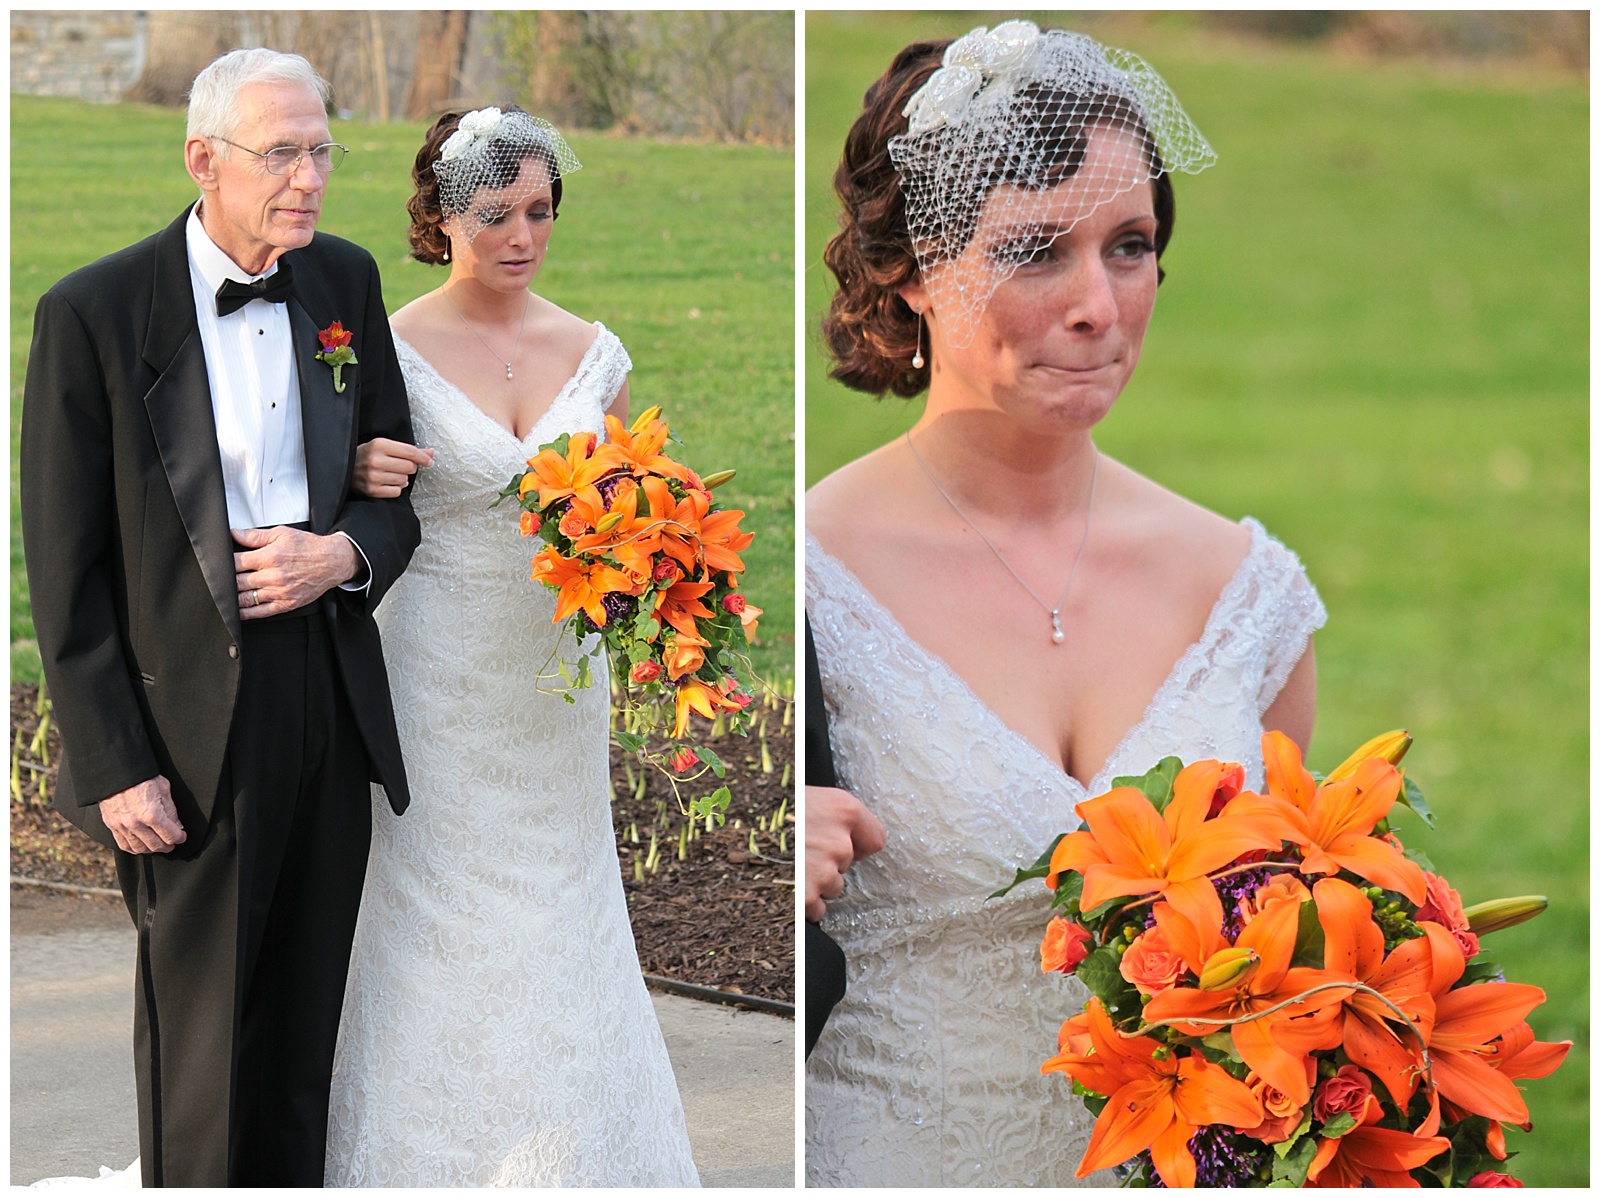 Wedding photography at The Elms Hotel and Spa in Excelsior Springs, Missouri.